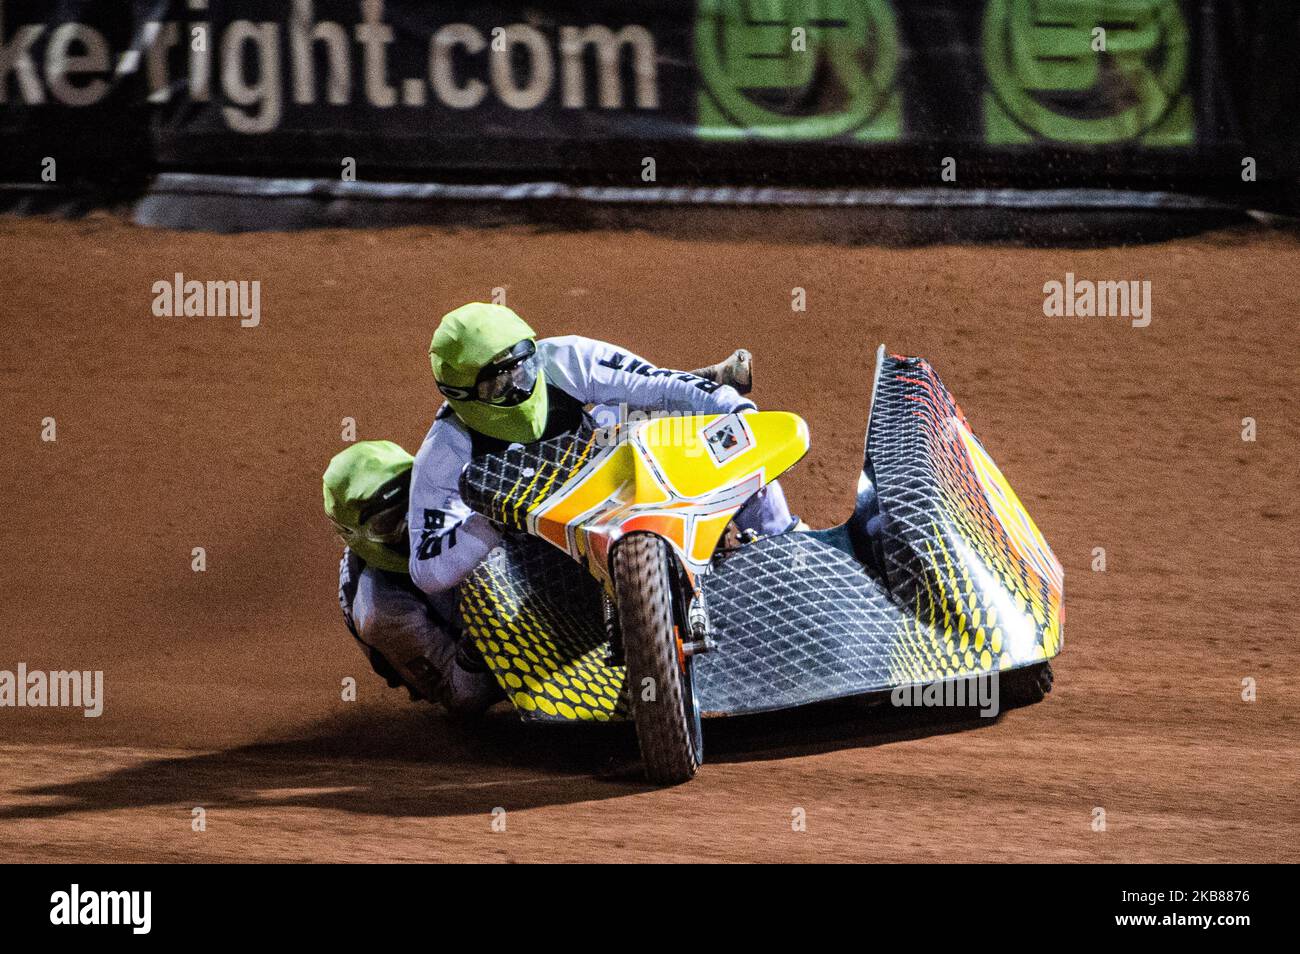 Tom Cossar & Wayne Rickards(29) in action during the ACU Sidecar Speedway Manchester Masters, Belle Vue National Speedway Stadium, Manchester Friday 11 October 2019 (Photo by Ian Charles/MI News/NurPhoto) Stock Photo